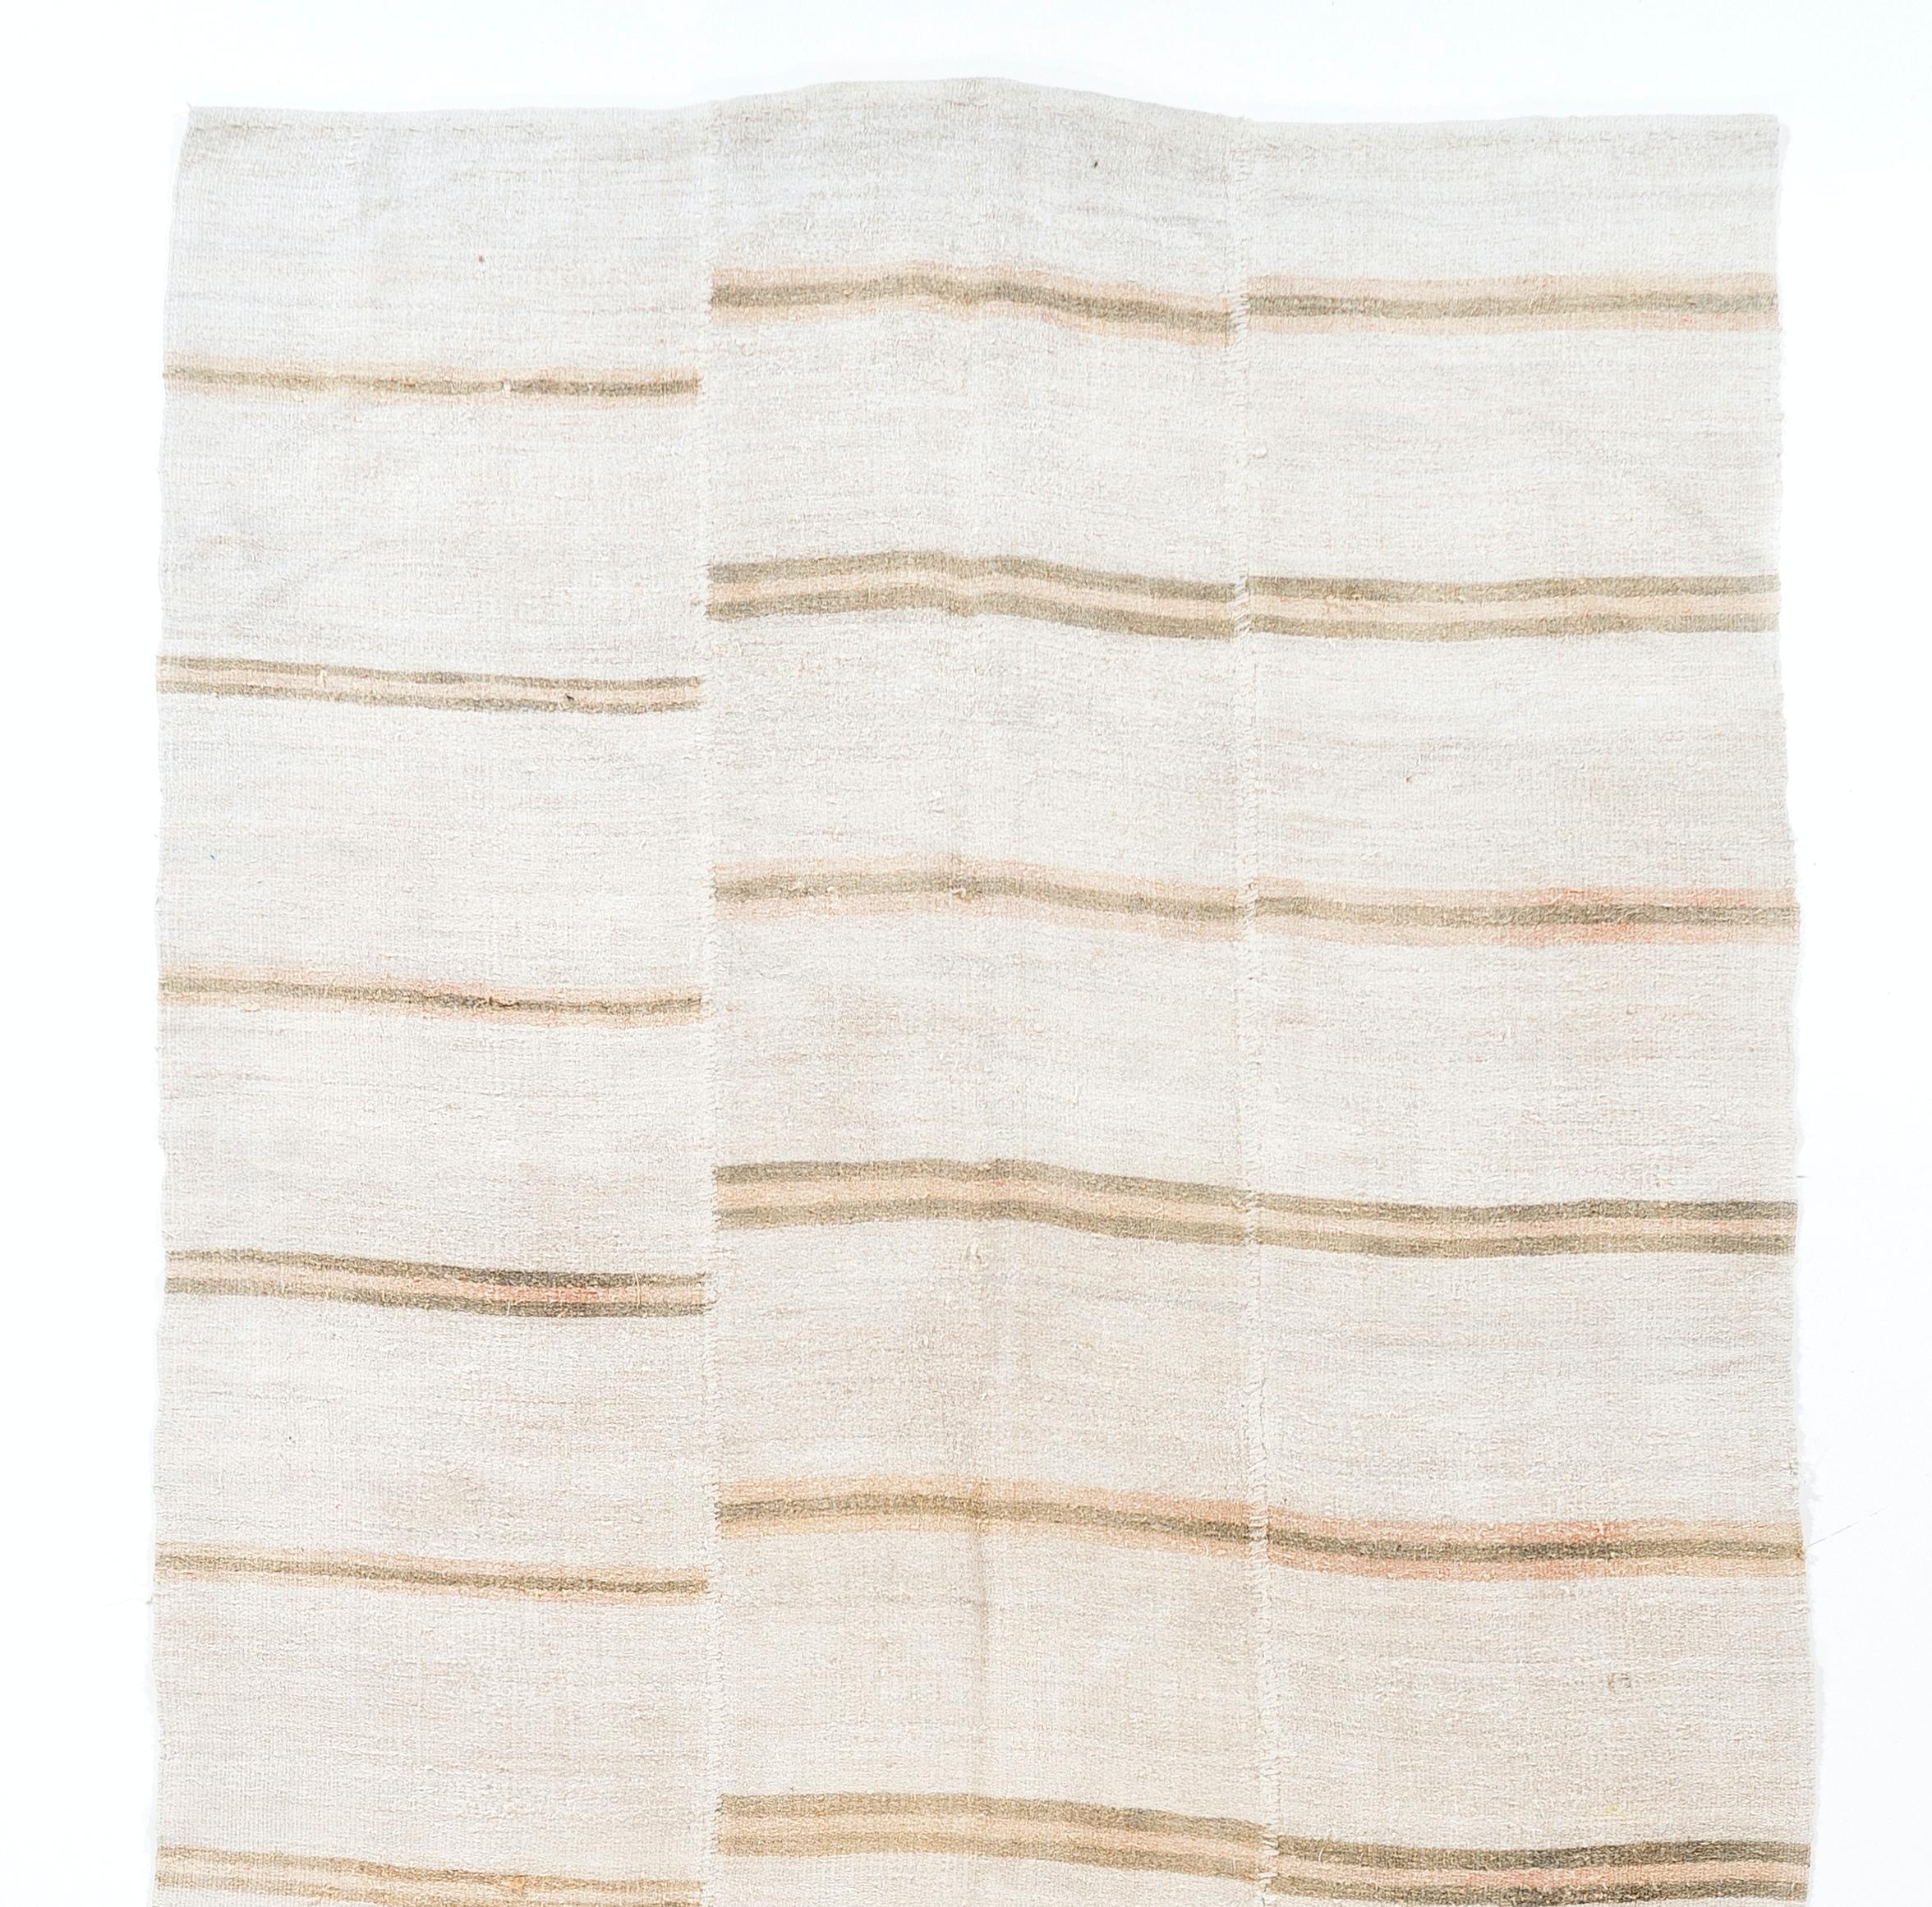 5.8 x 12.4 ft Vintage banded Kilim made of hemp with stripes in faded brown and peach against an ivory background. This flat-weave floor covering was handwoven in Turkey circa 1970. It was first made in three separate bands and then hand-stitched.